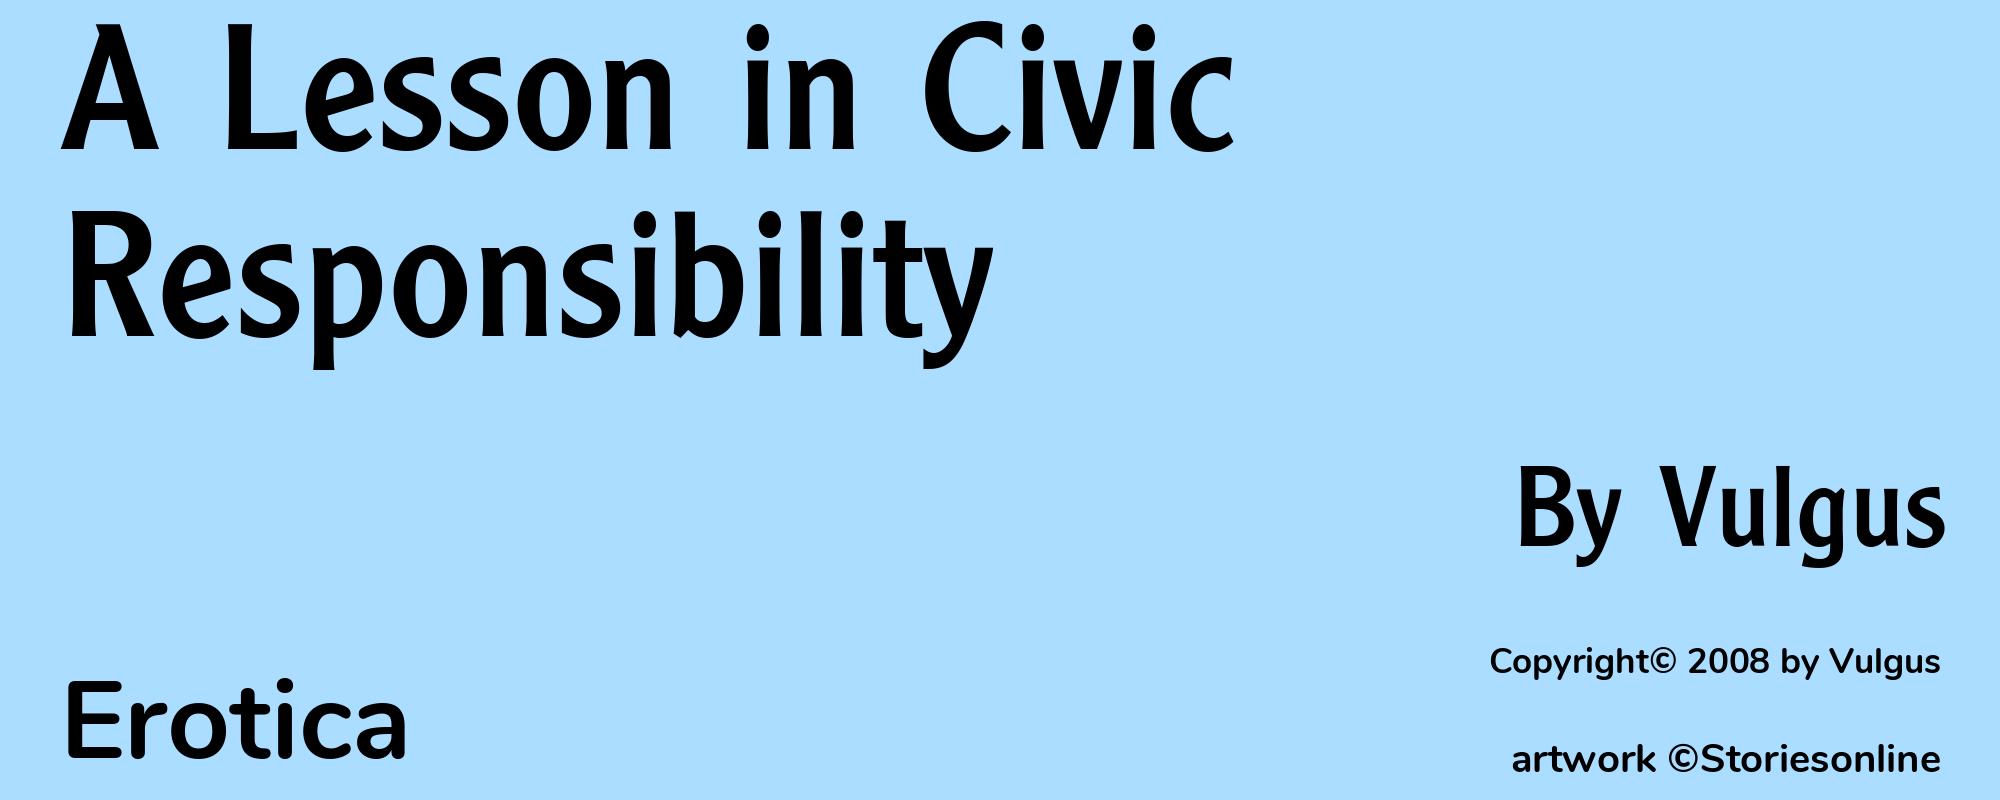 A Lesson in Civic Responsibility - Cover